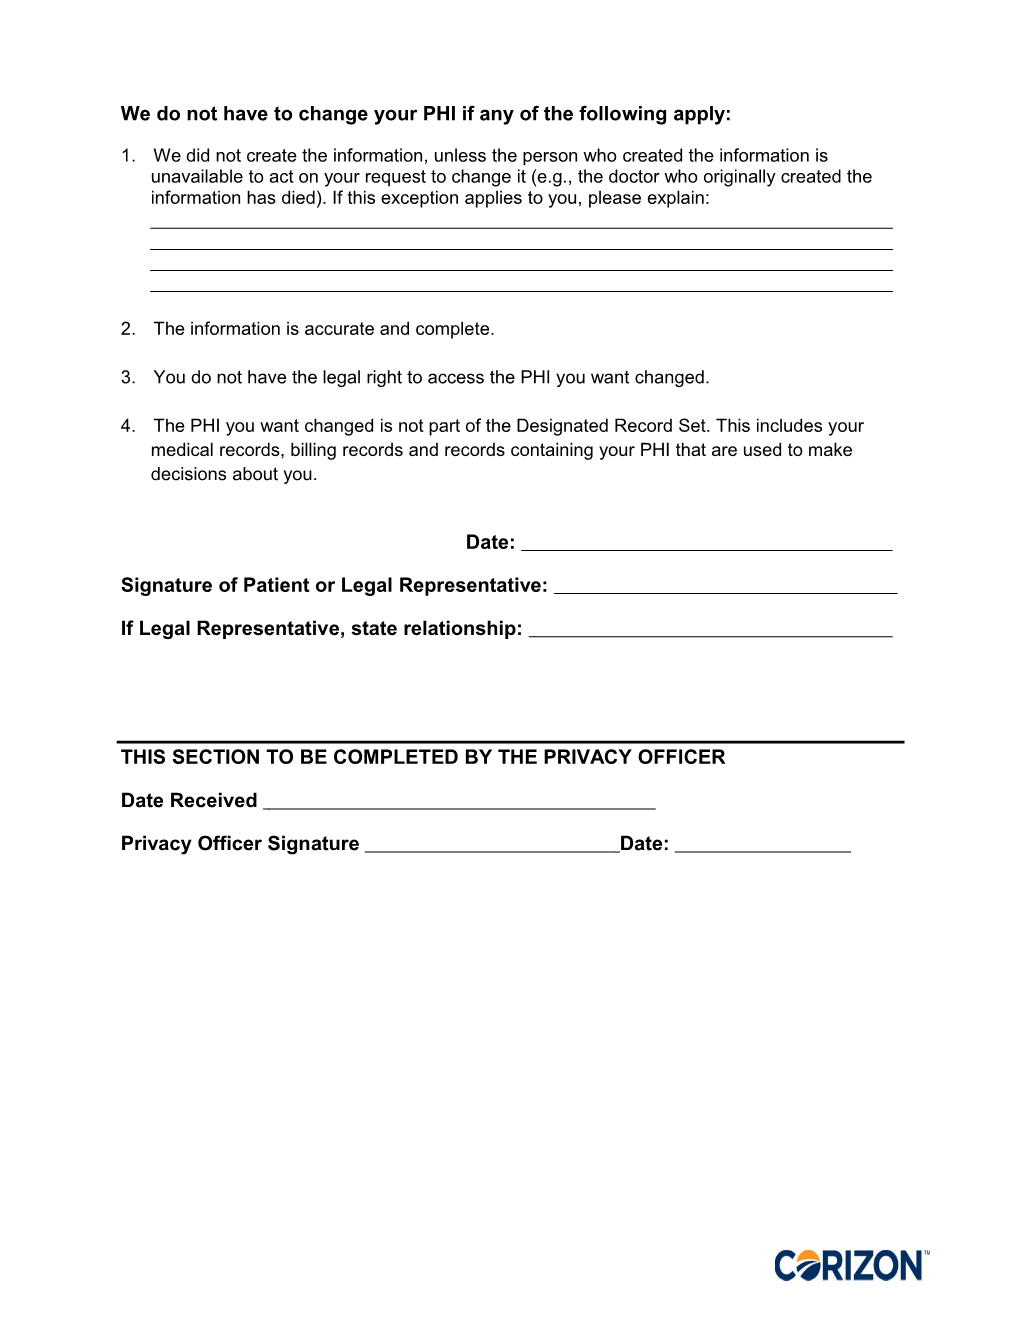 Request to Amend Phi Form